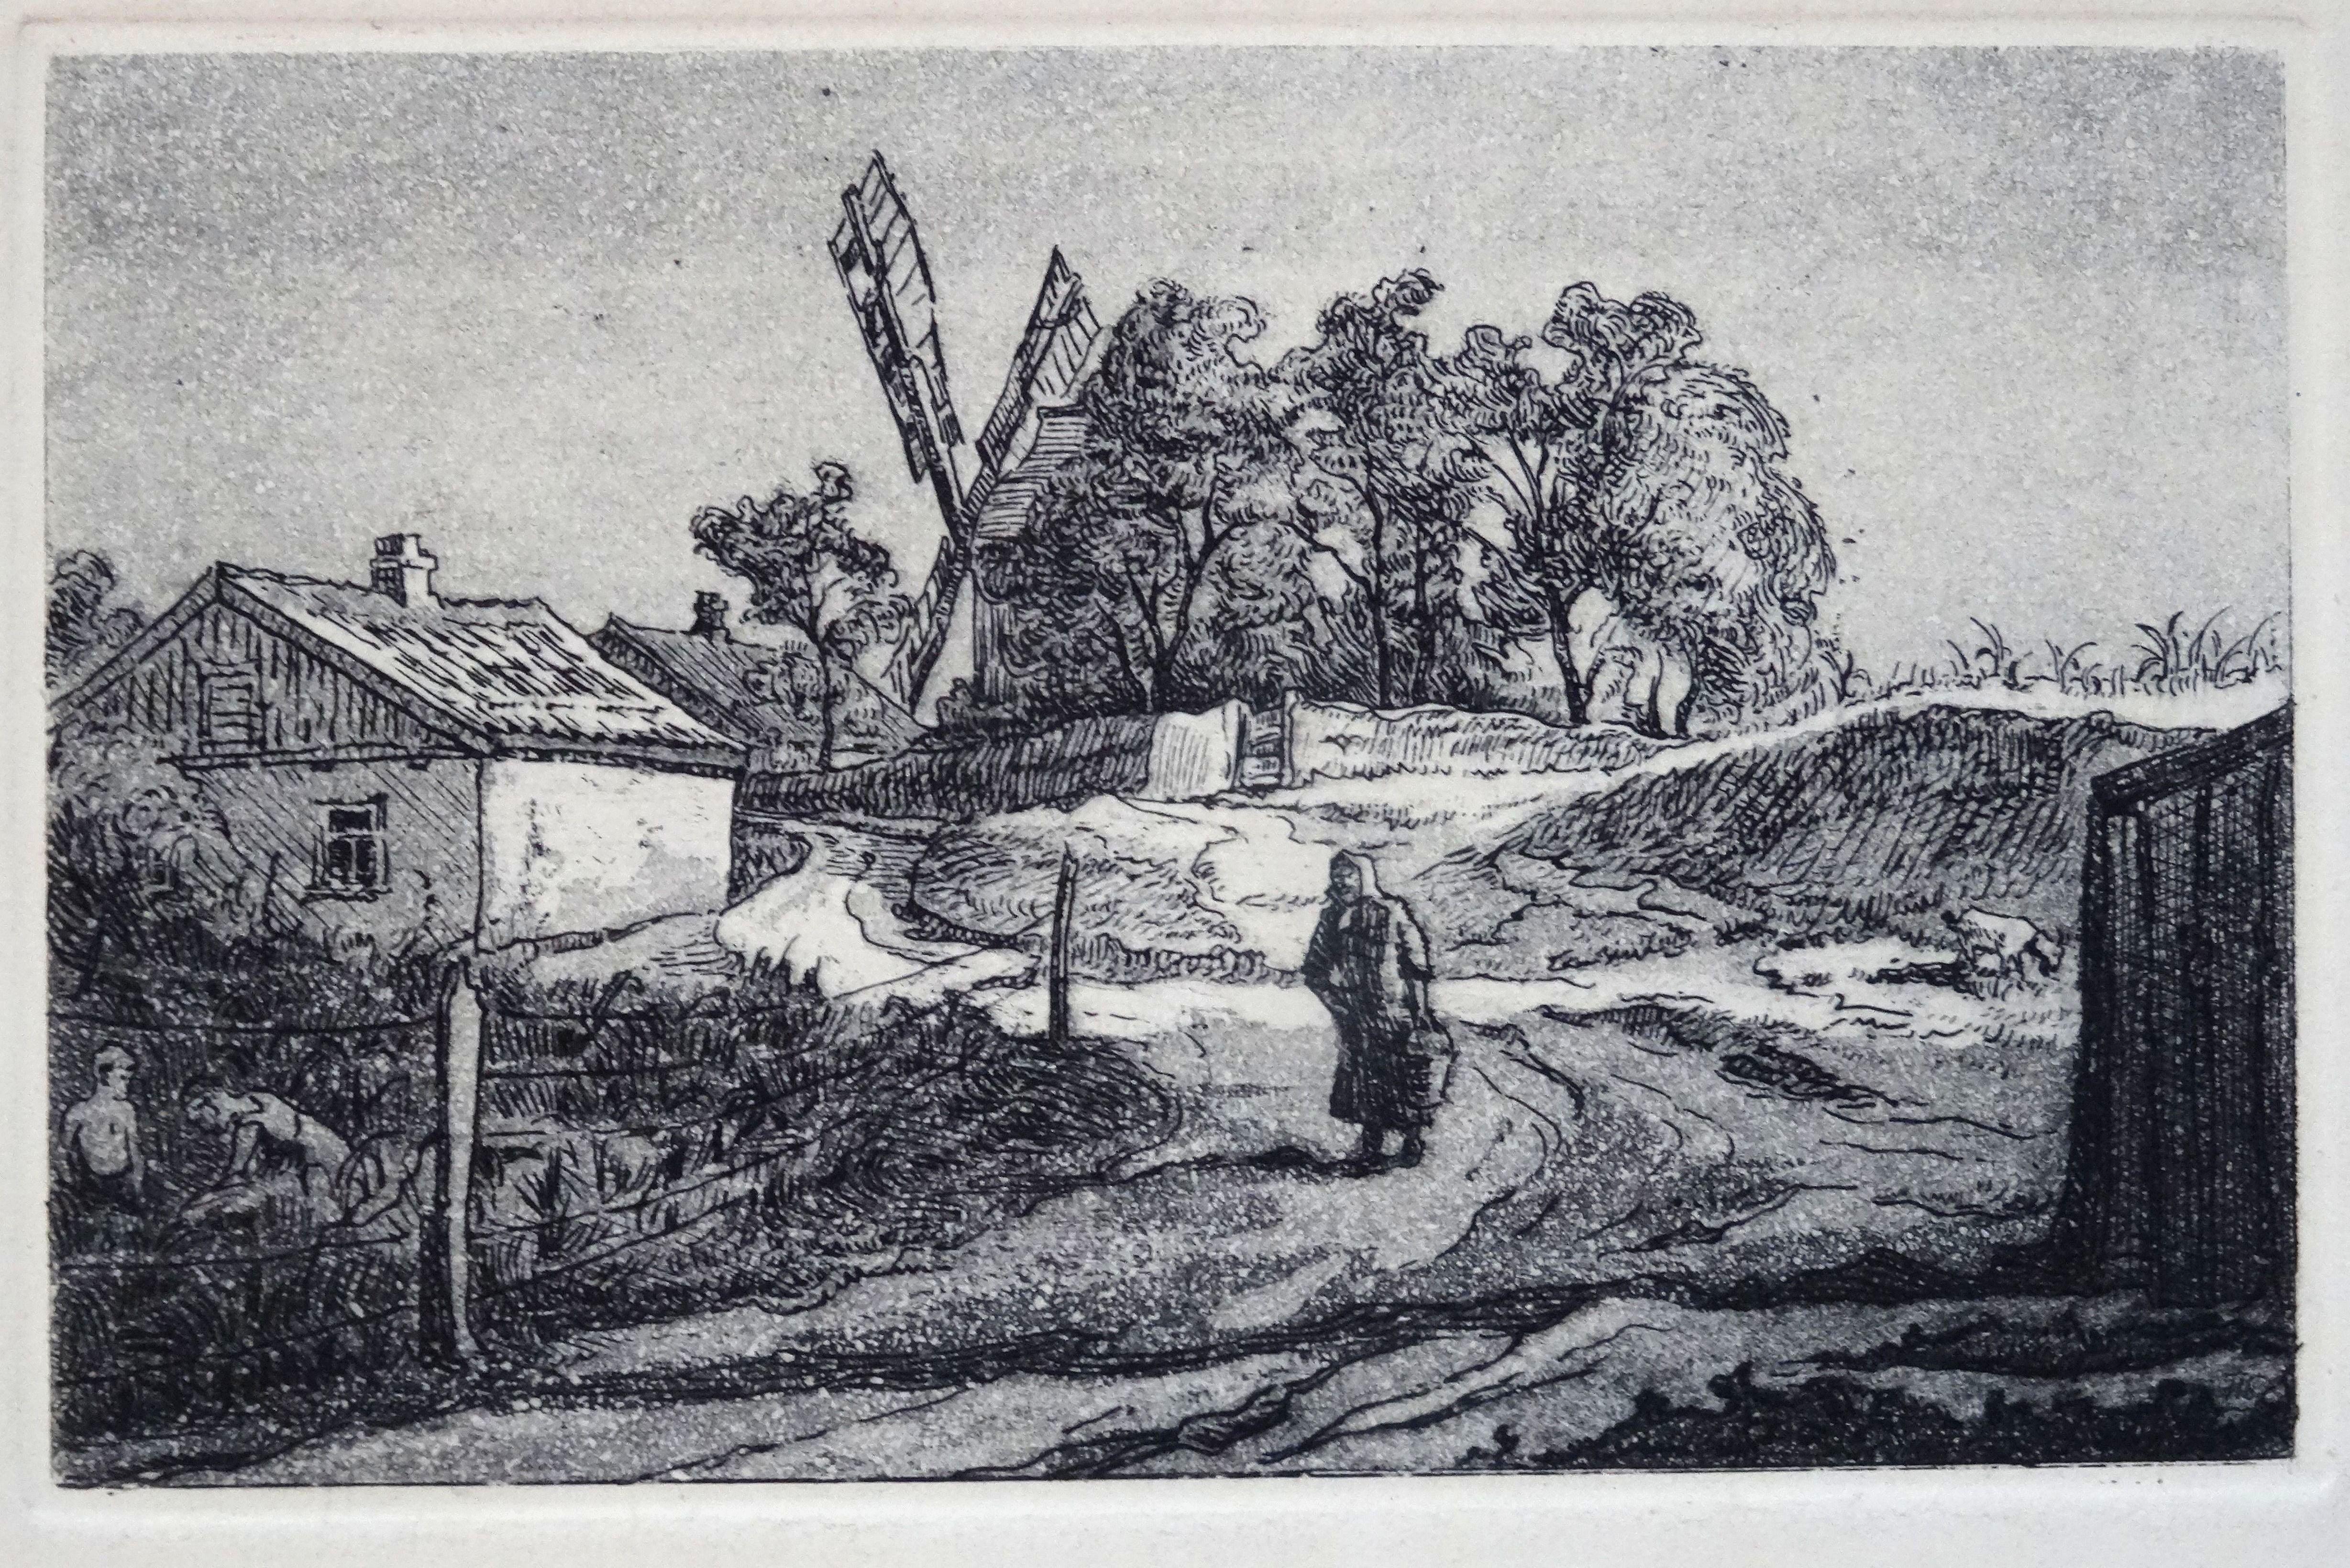 Piotr Petrovich Belousov Landscape Print - The road from the mill. 1975 Paper, etching, 10x14.5 cm